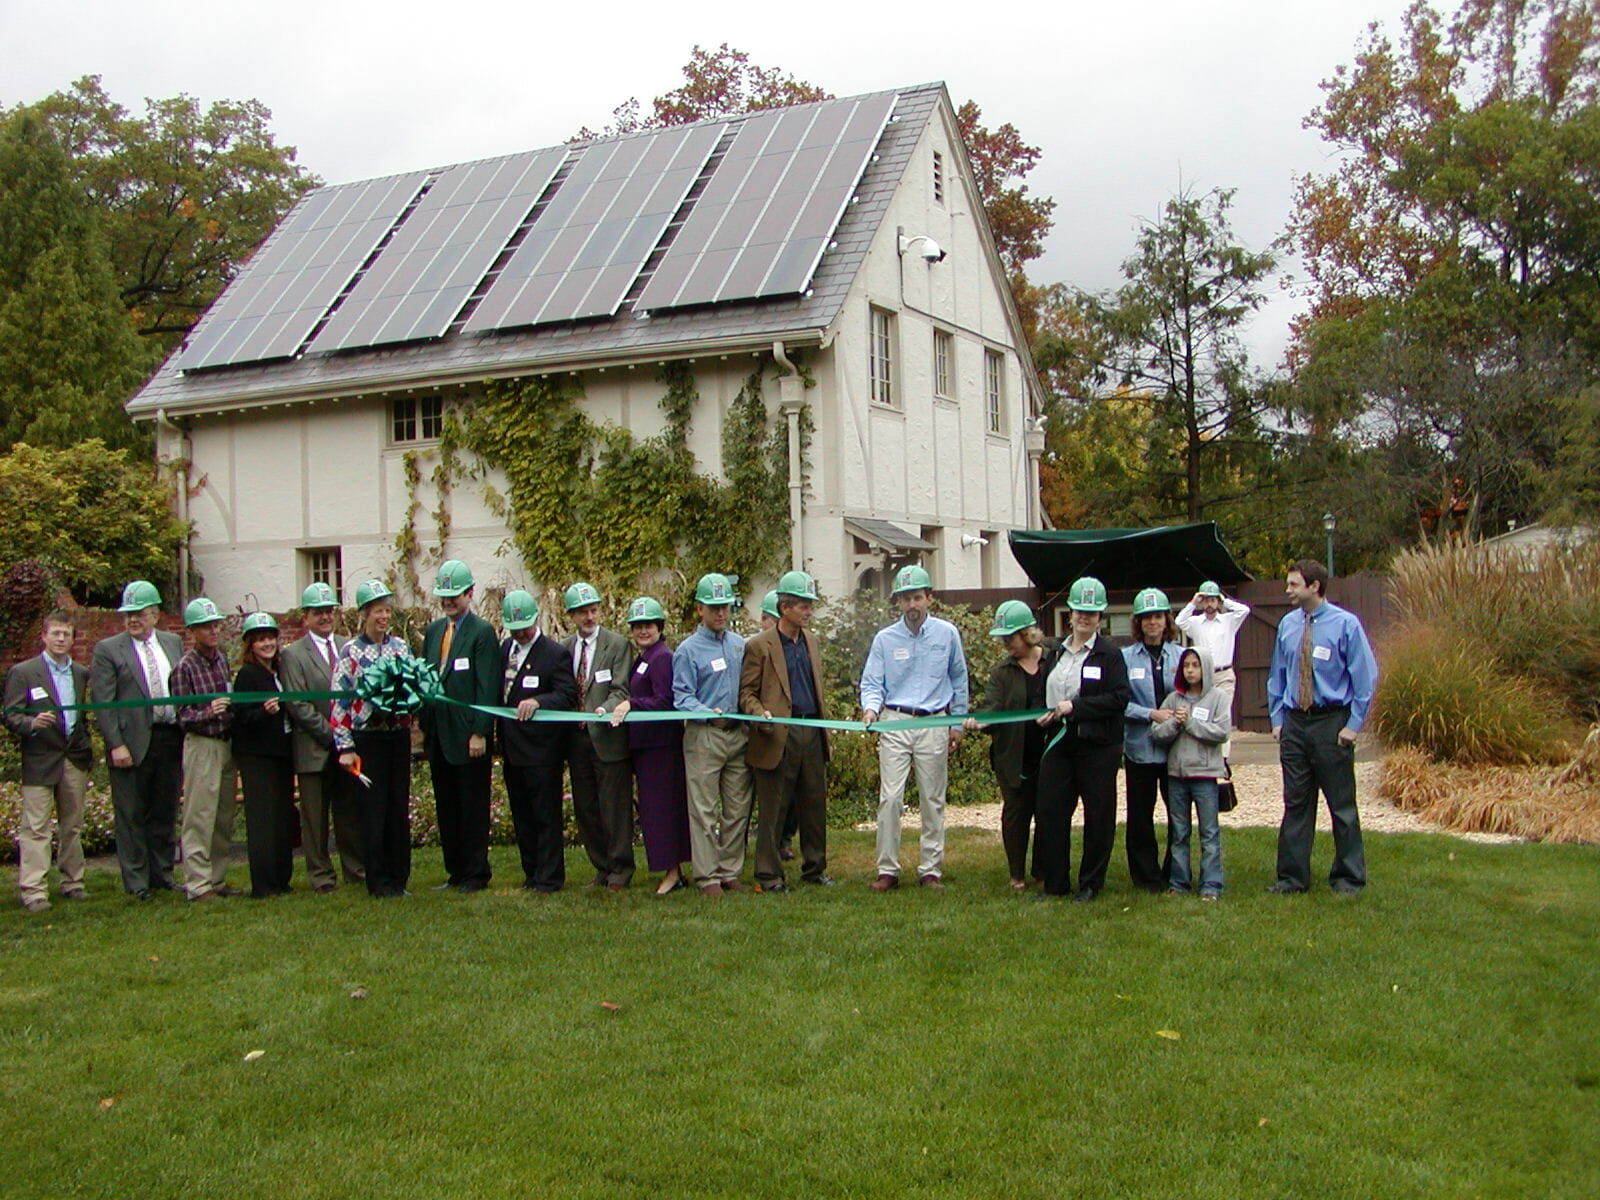 Solar Energy System on the Carriage House at the Governor’s Residence